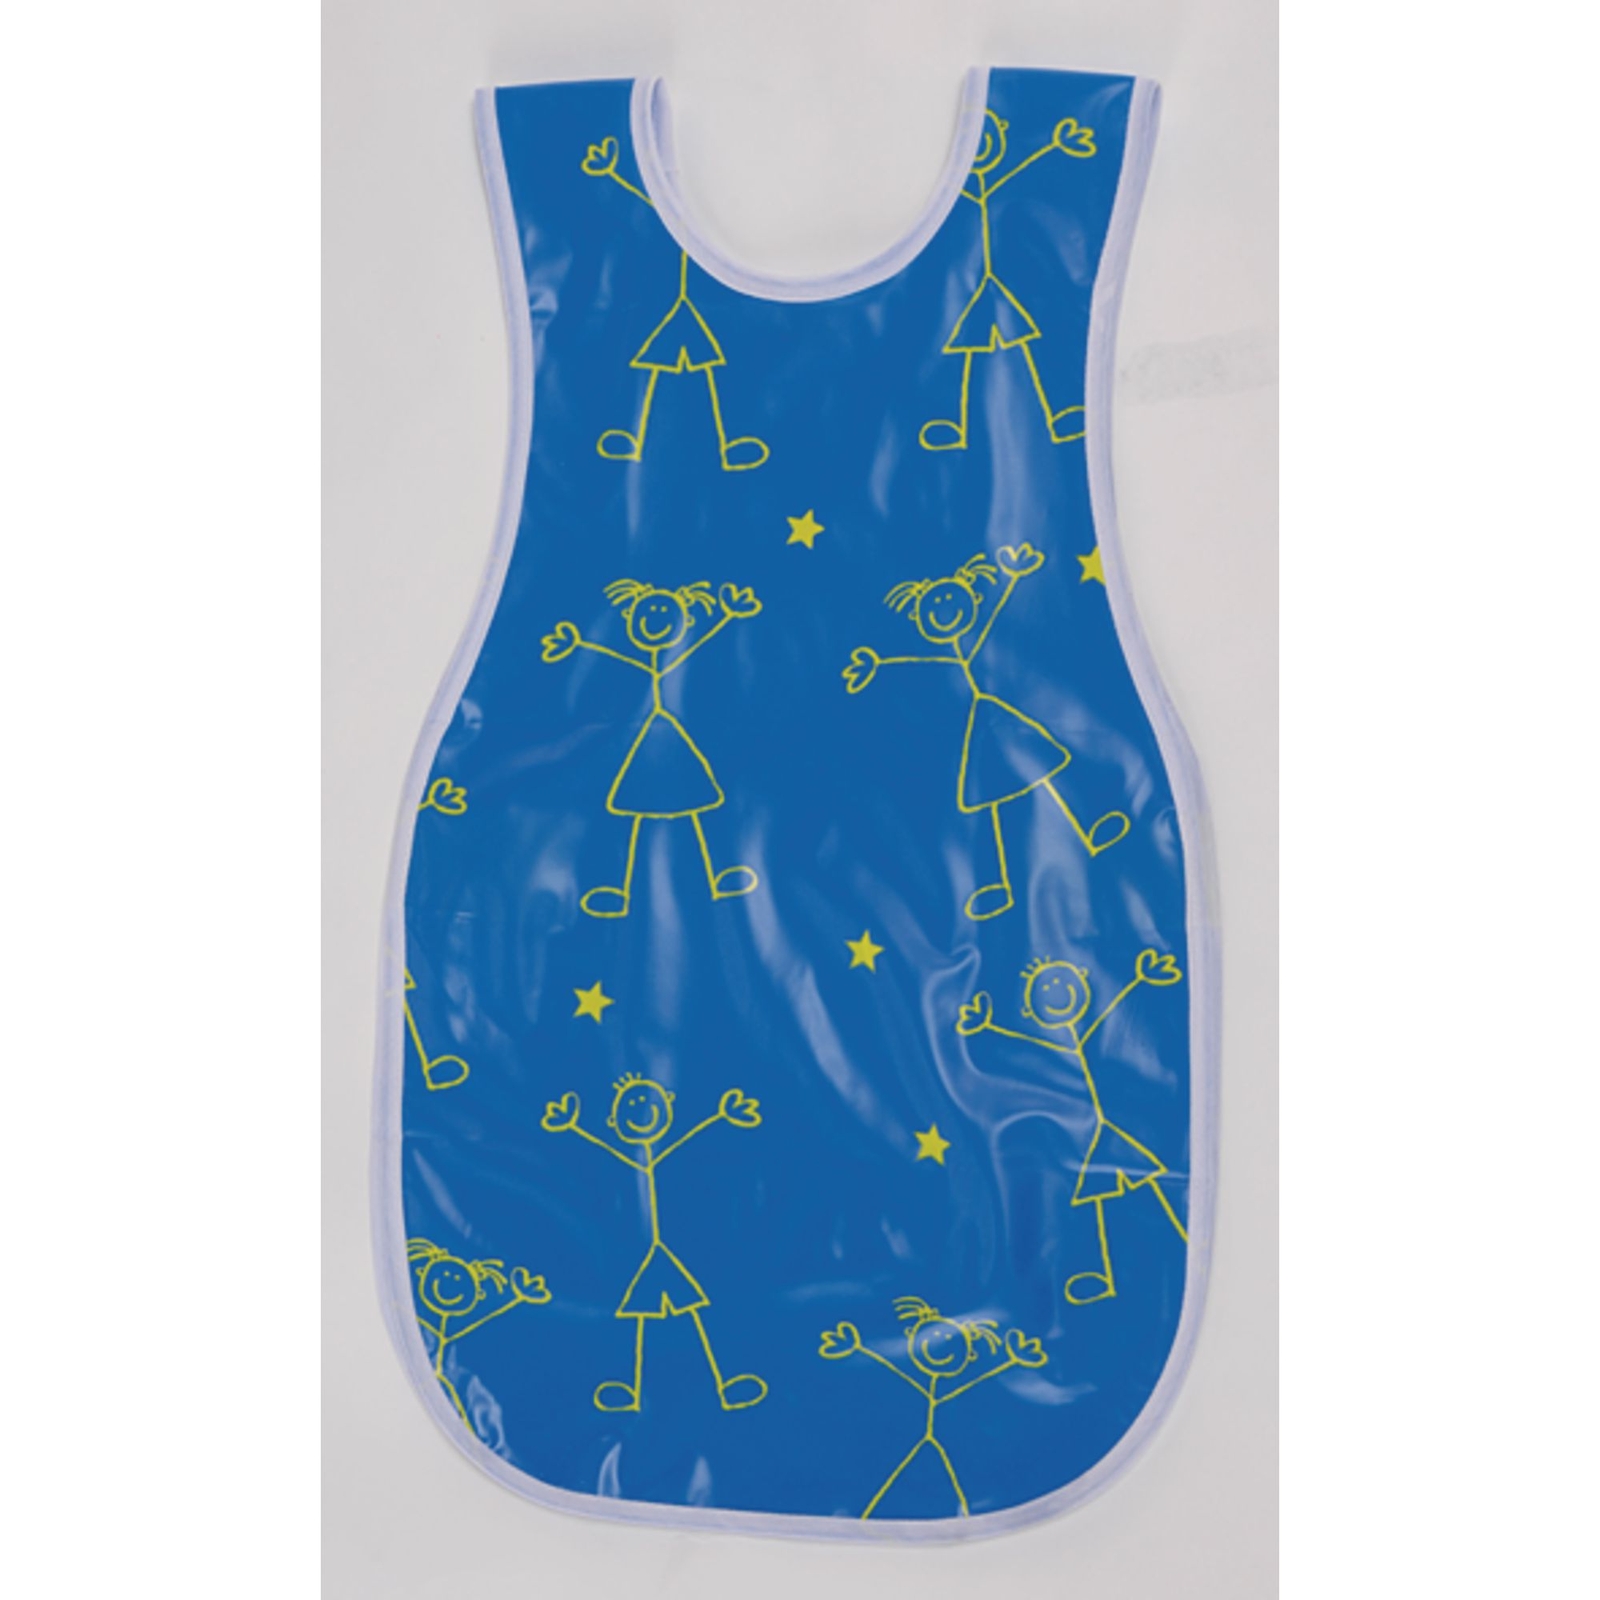 Print Water Play Tabards - 1-2 Years - Pack of 3